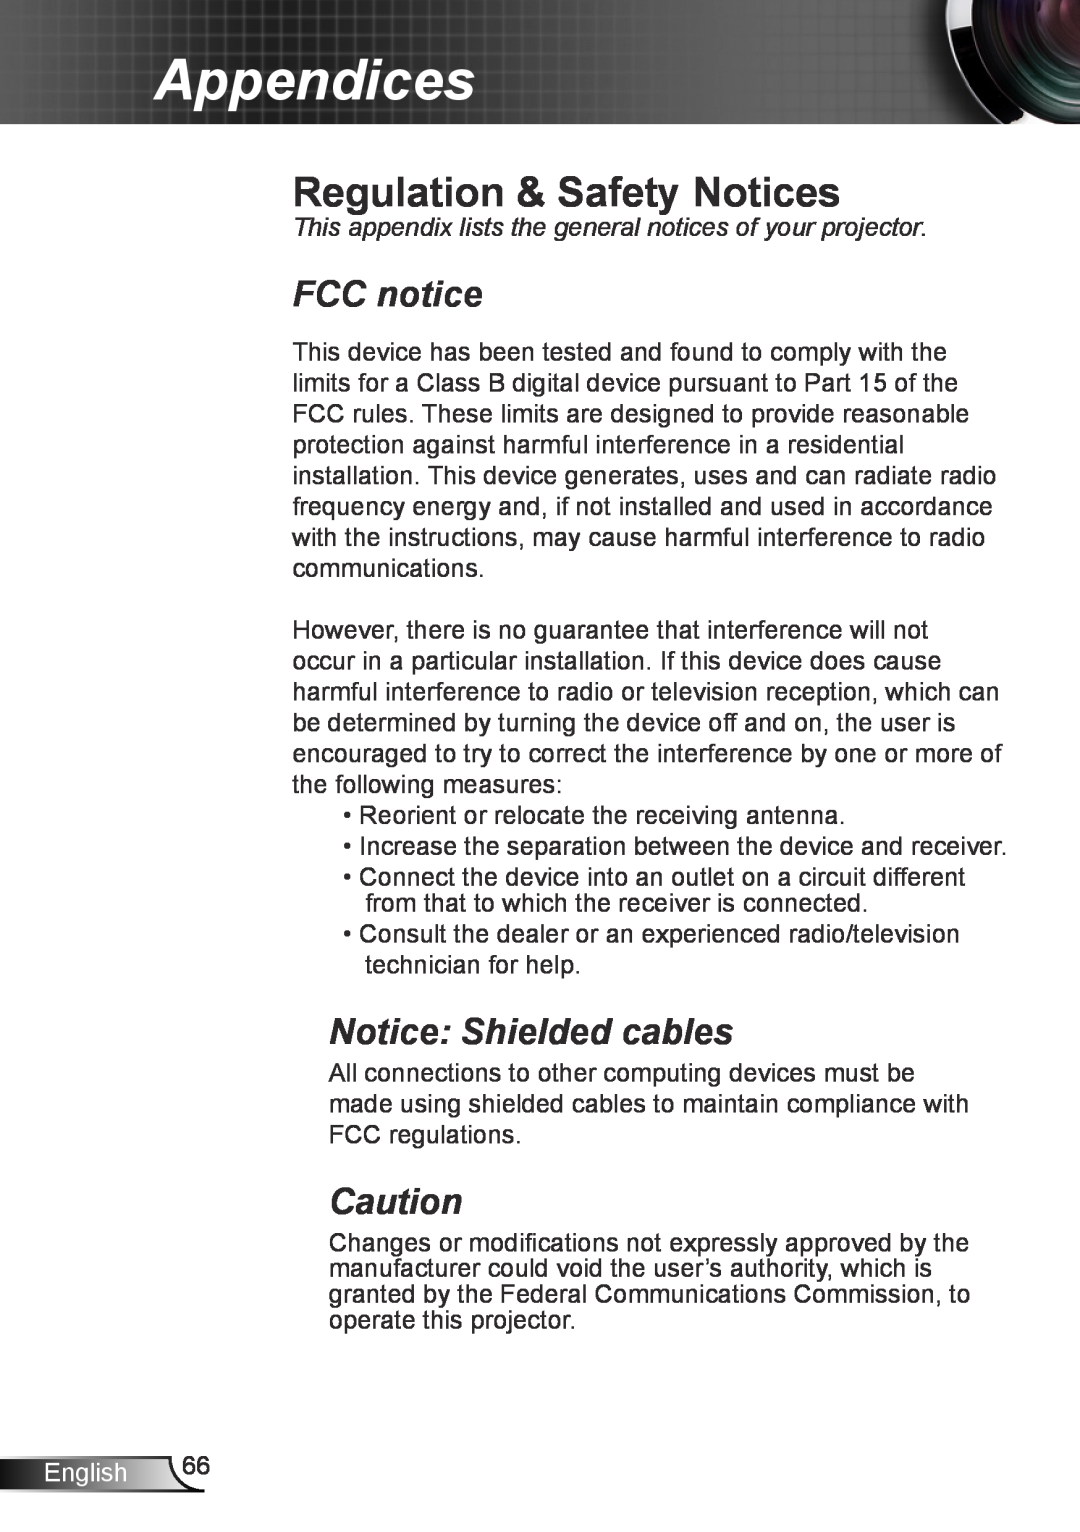 Optoma Technology TW762GOV manual Regulation & Safety Notices, FCC notice, Notice Shielded cables, Appendices, English 